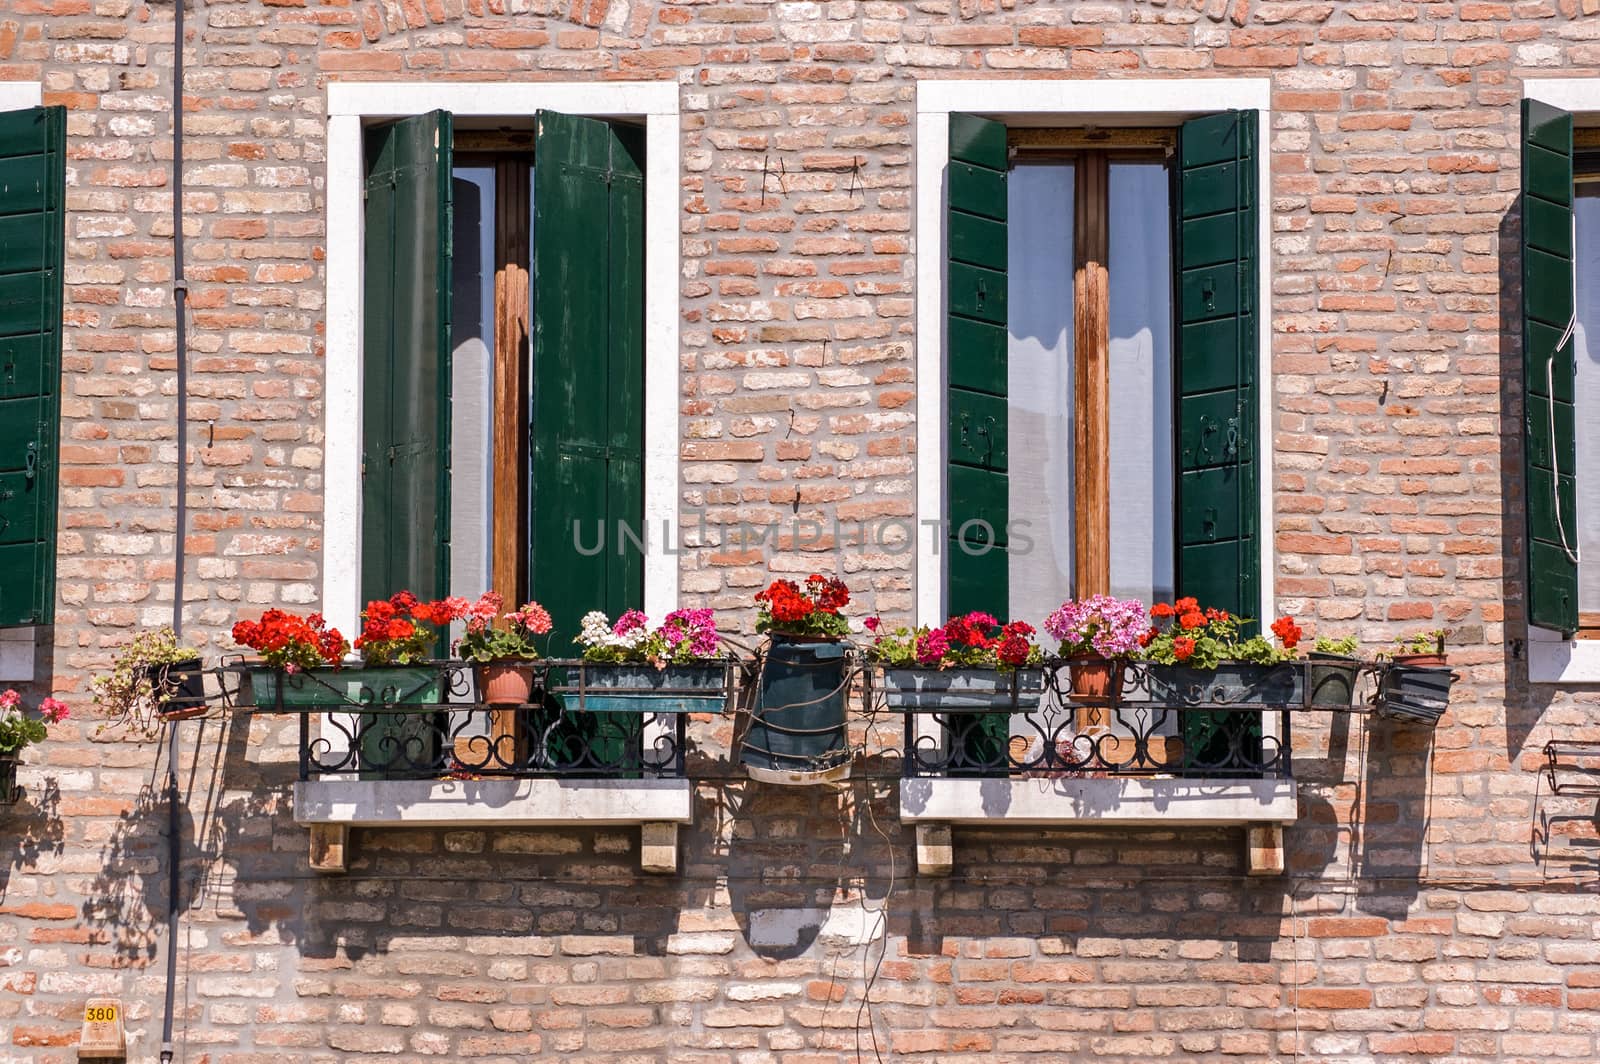 Traditional Italian balconies with perlagonium filled window boxes. Venice, Italy.